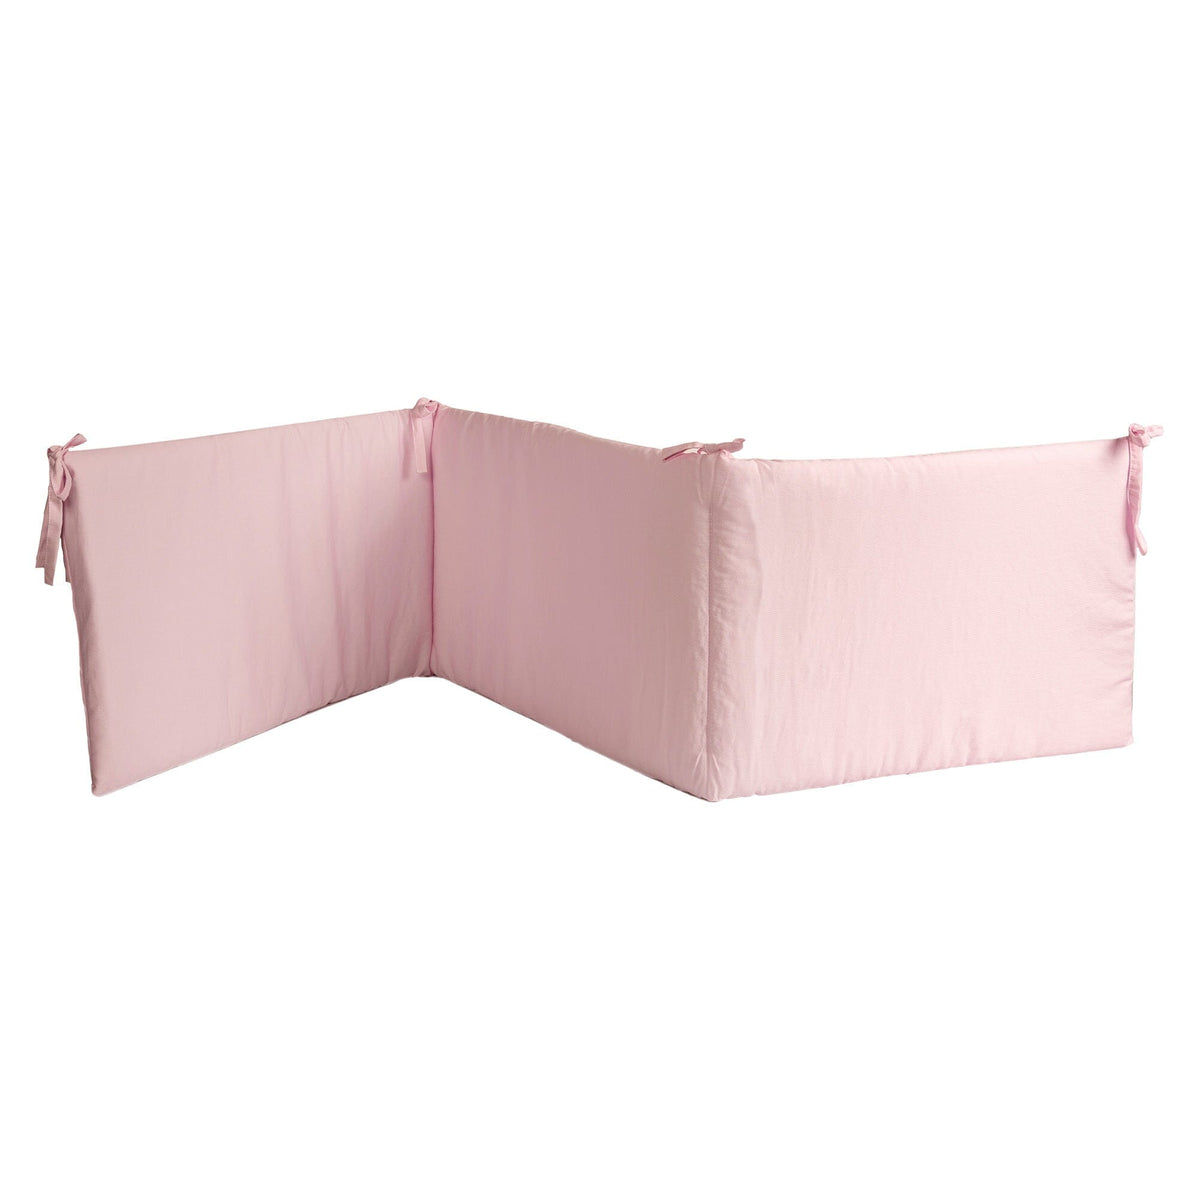 Paracolpi per Lettino in Piquet di Cotone - Safe&amp;Soft Paracolpi Lisola Baby Rosa 